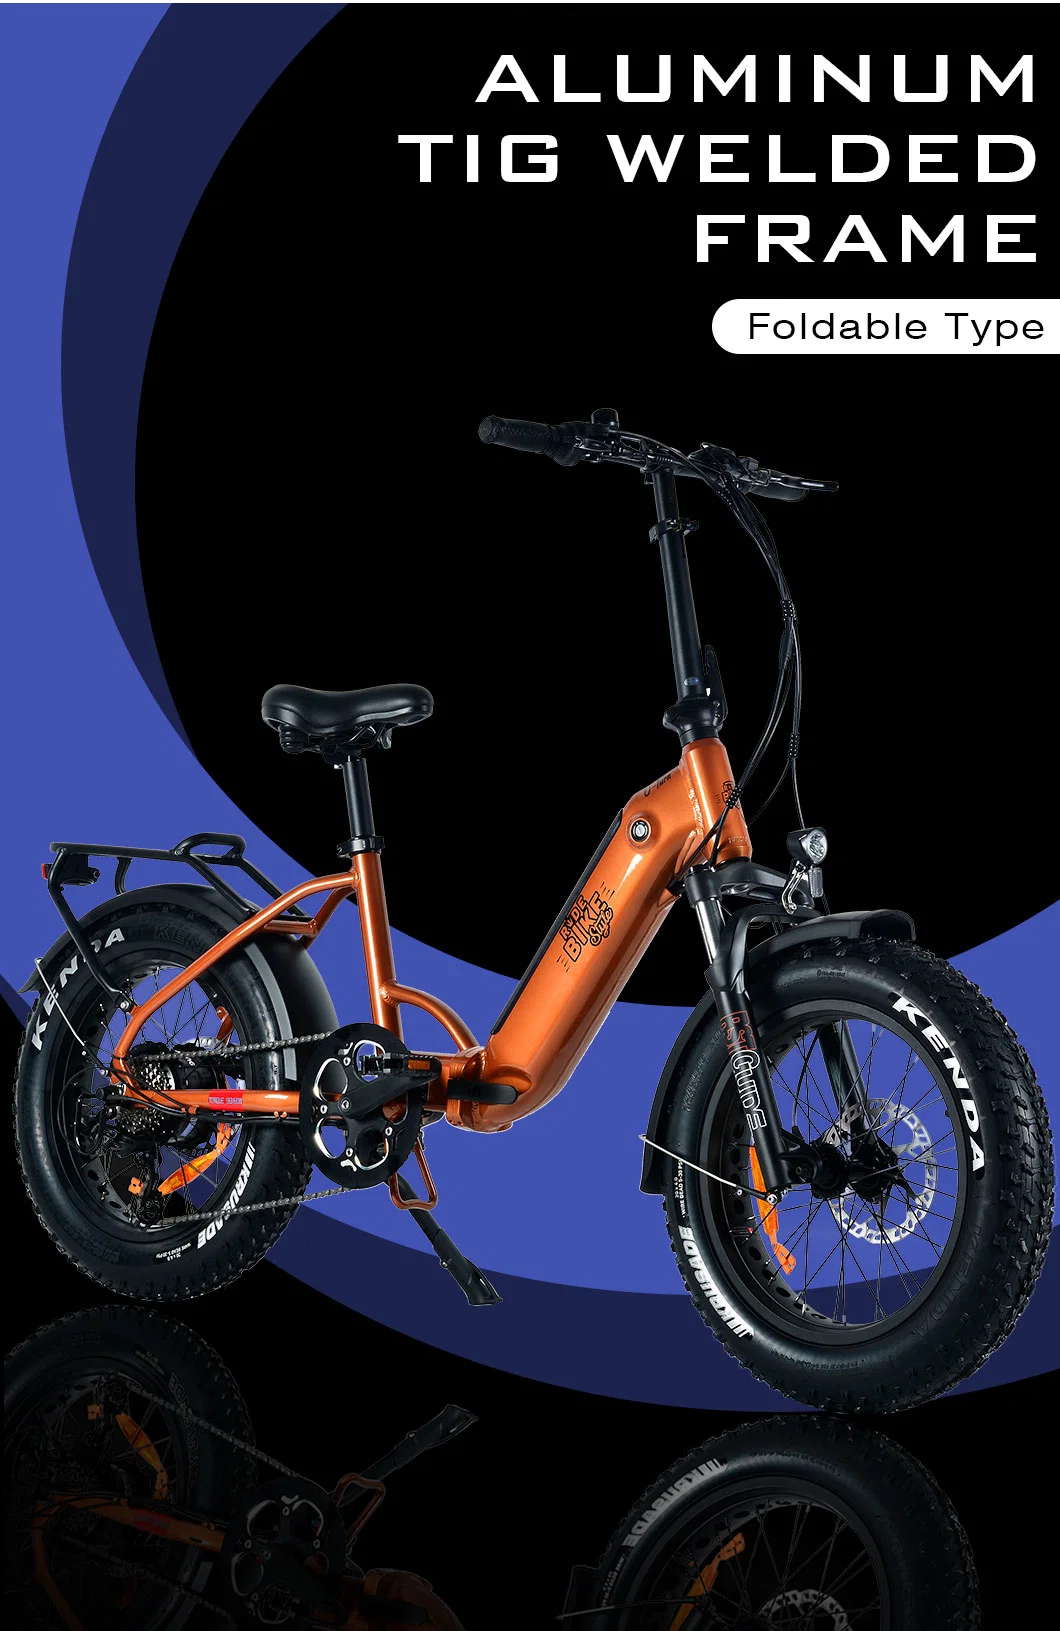 350W Aluminum Foldable Frame Electric Bicycle Folding Ebike for Women